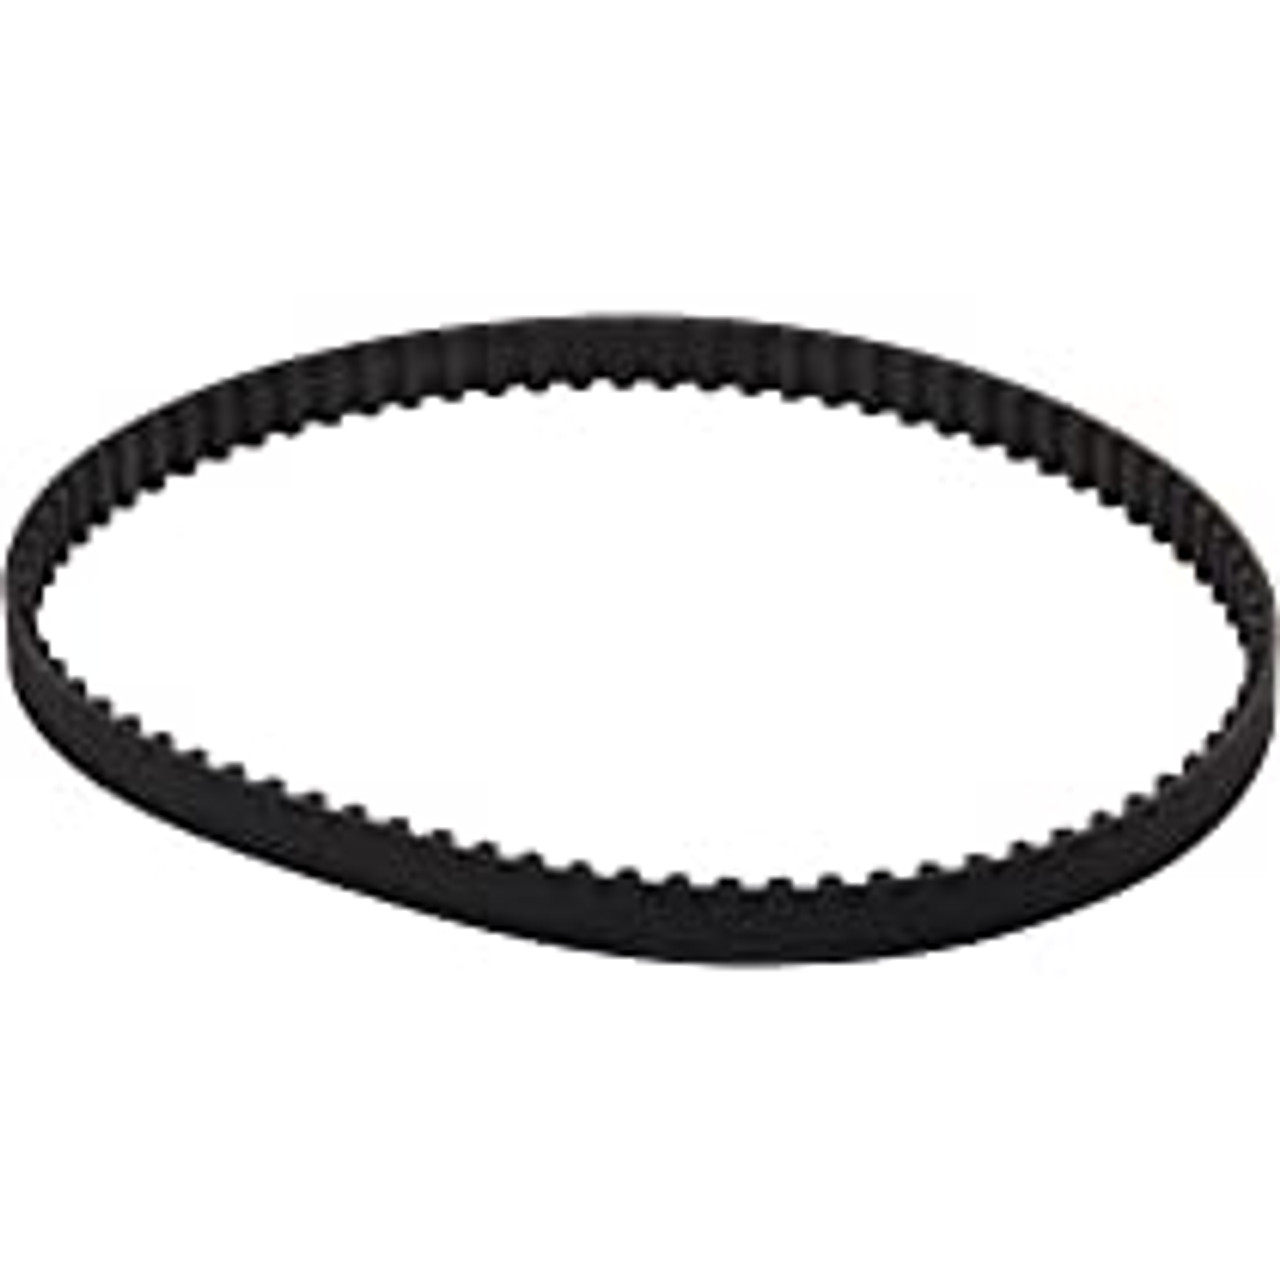 Genuine Timing belt for Mercury 60 R HP Racing outboard